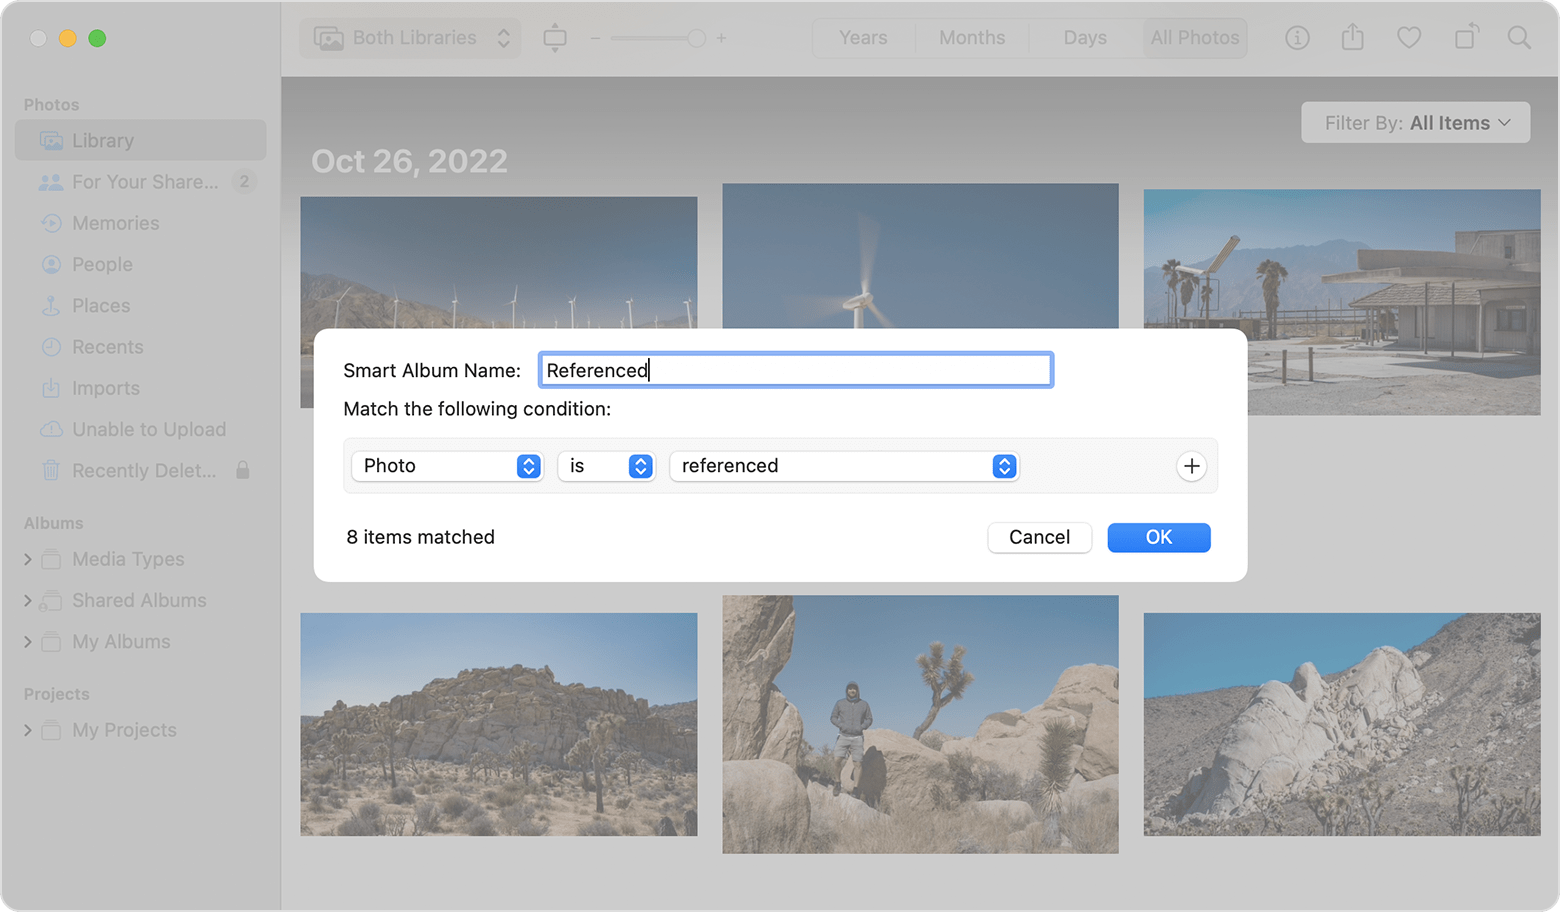 New Smart Album dialog showing a Smart Album being named “Referenced” and setting the conditions to “Photo is referenced.” 